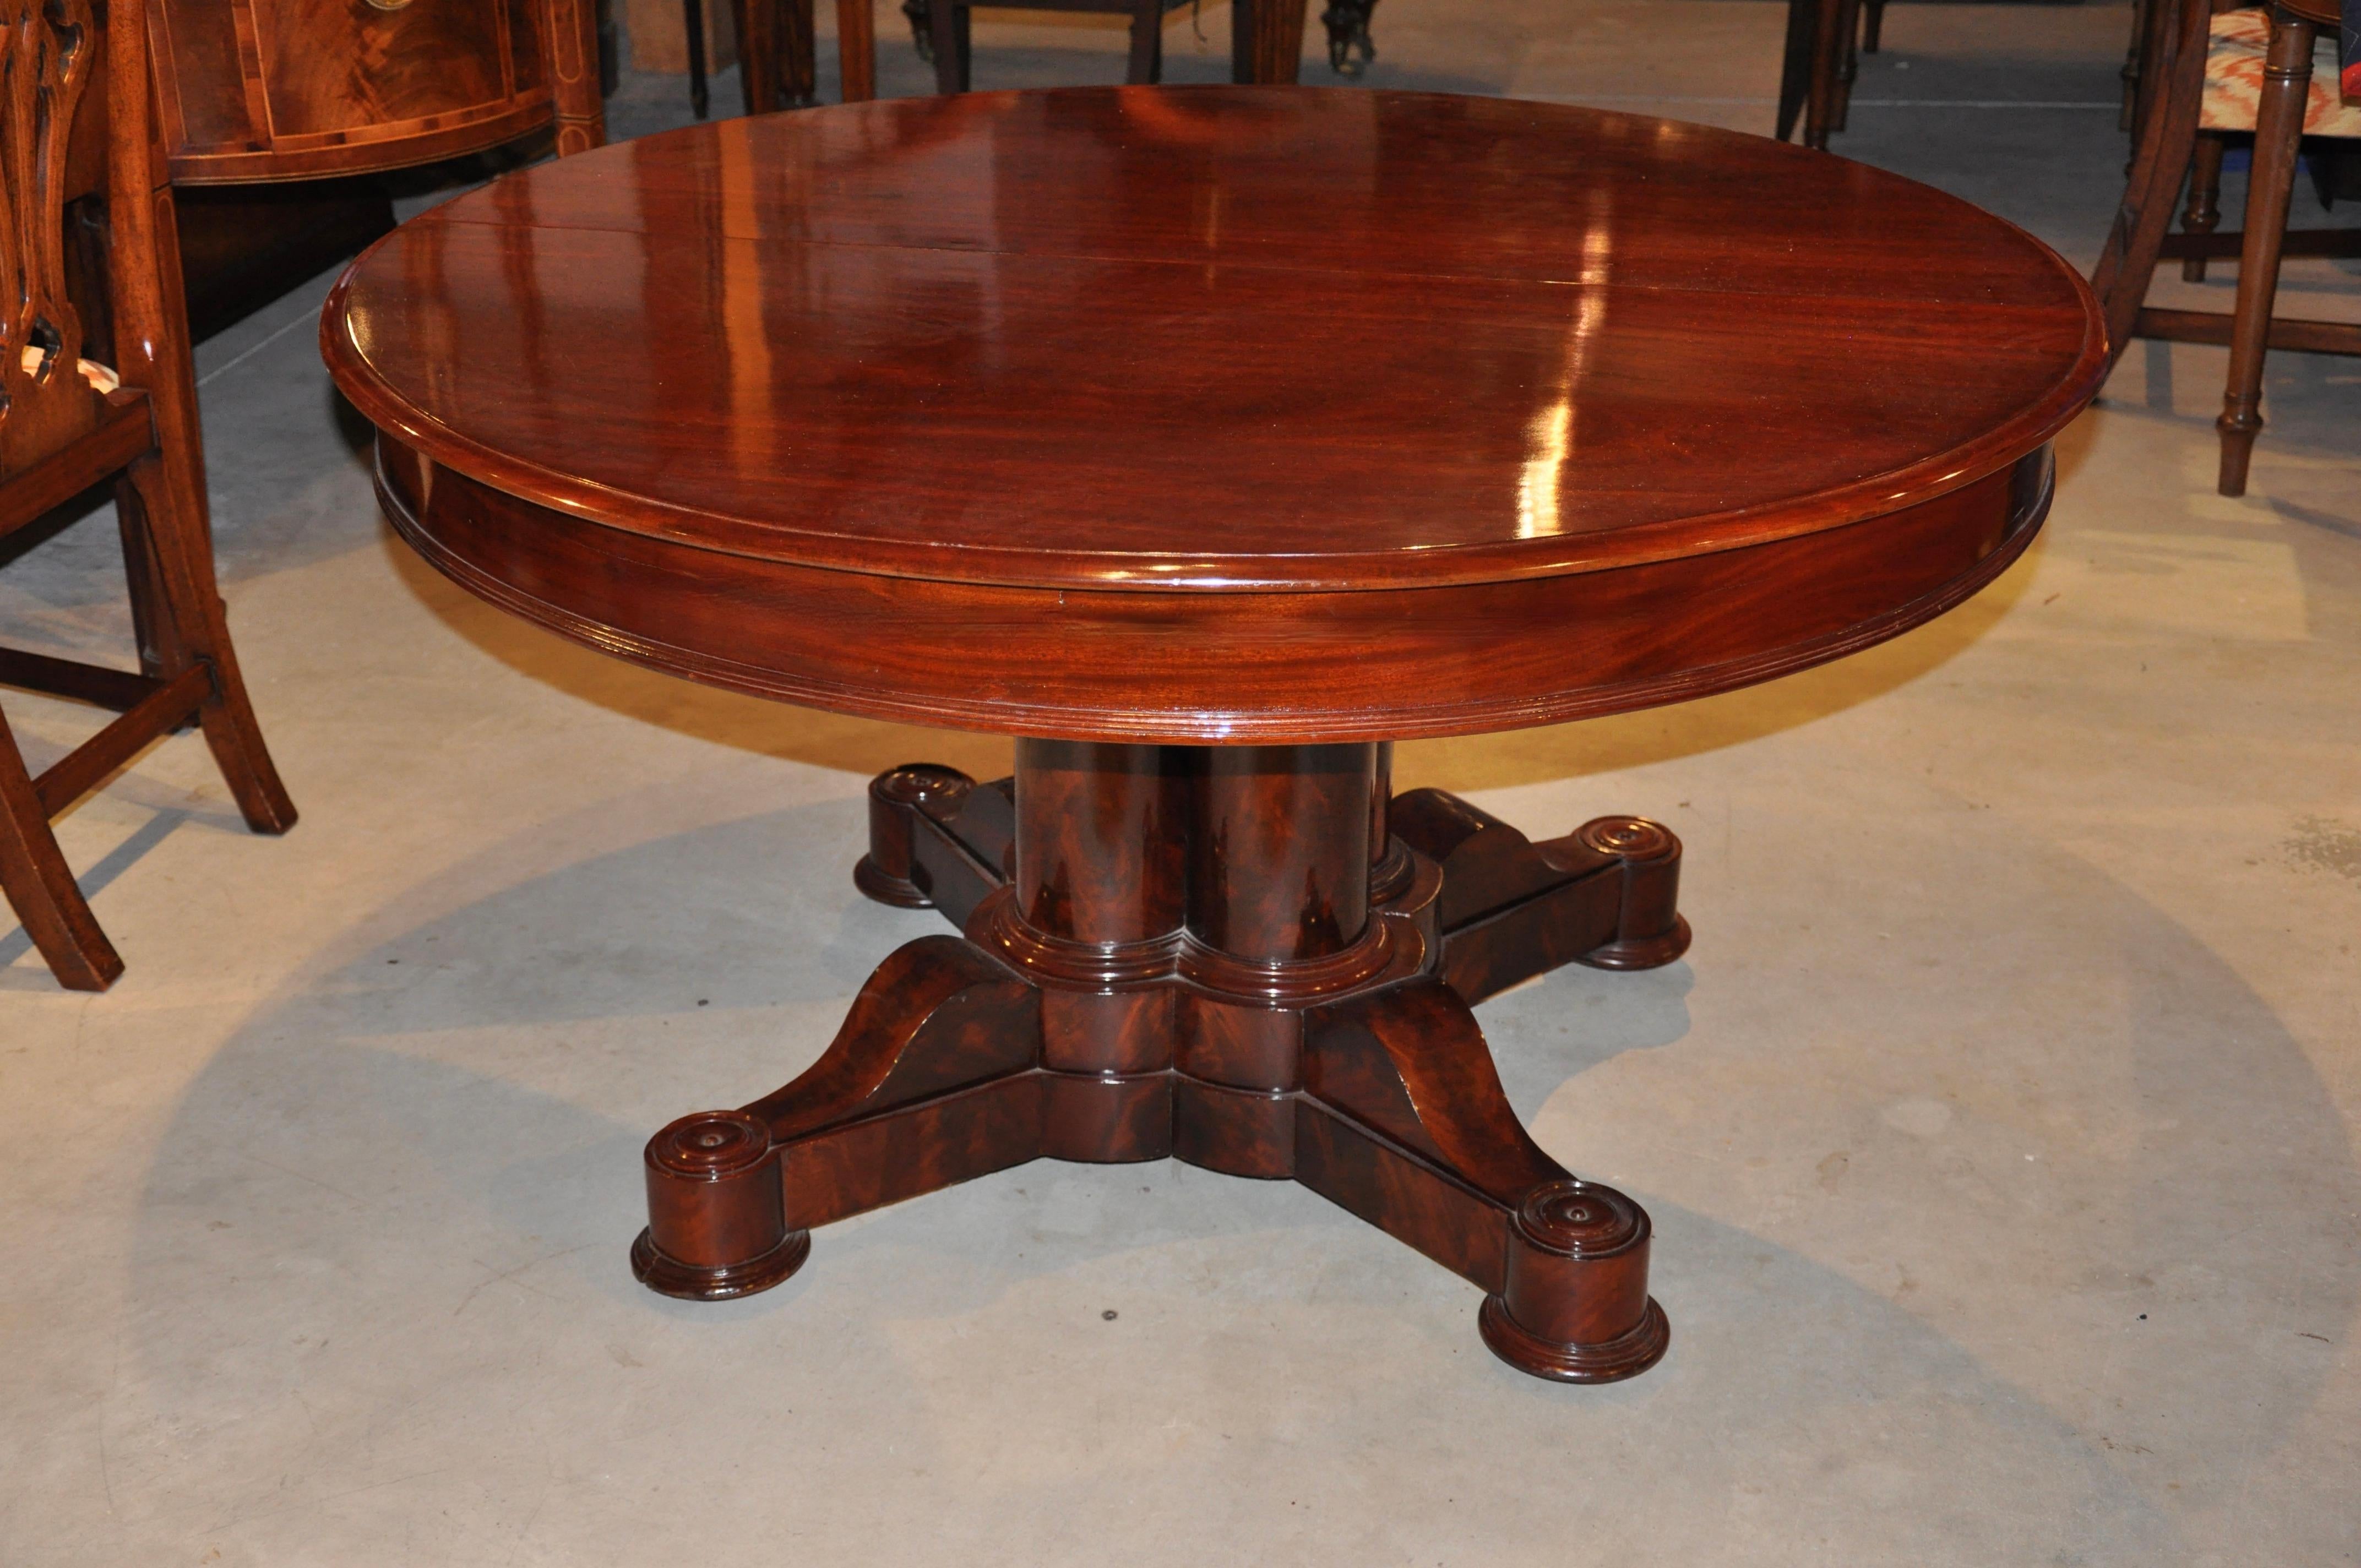 Period Boston Federal mahogany round dining table with four extension leaves (original)

Split pedestal base with four Round neoclassical column pedestal, Cuban and African Crotch Grain mahogany, attributed to Cornelius Briggs, Boston
Briggs